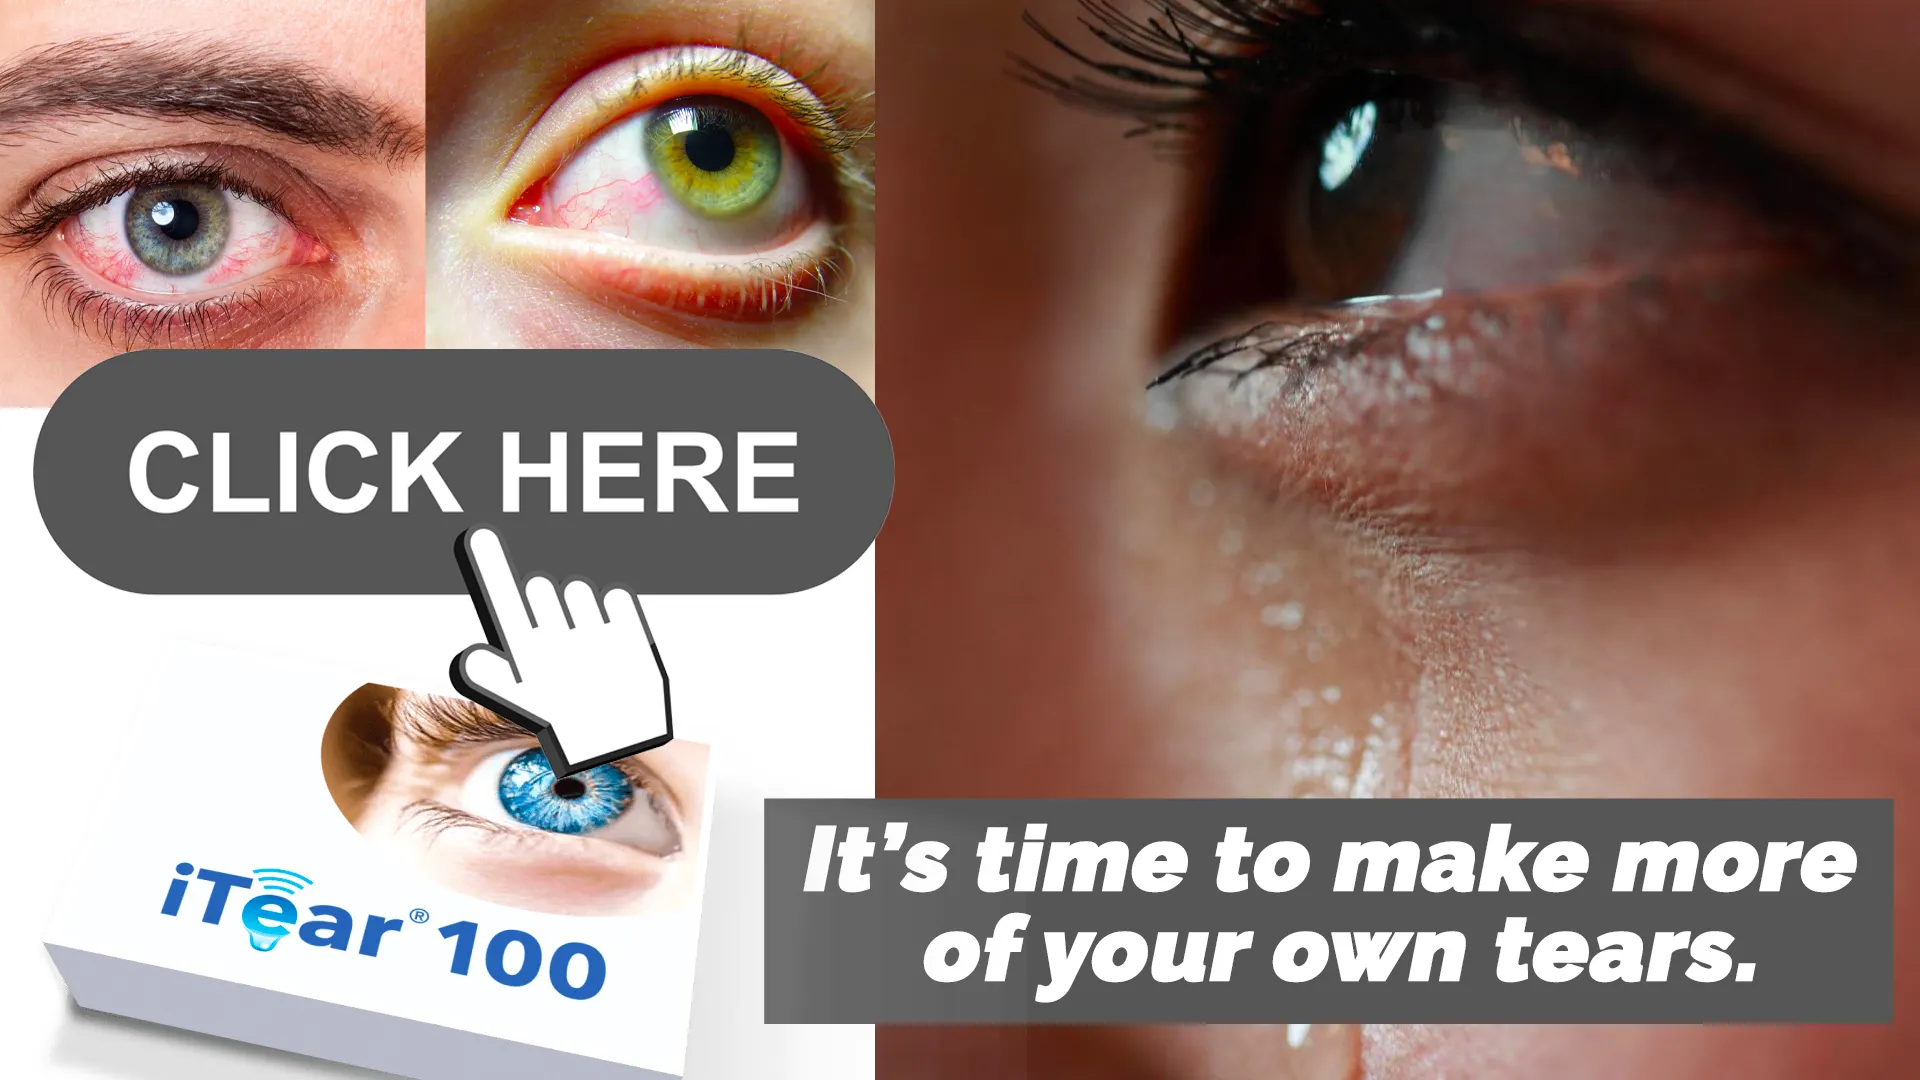 Welcome to the World of iTear100: A Fresh Perspective on Eye Care